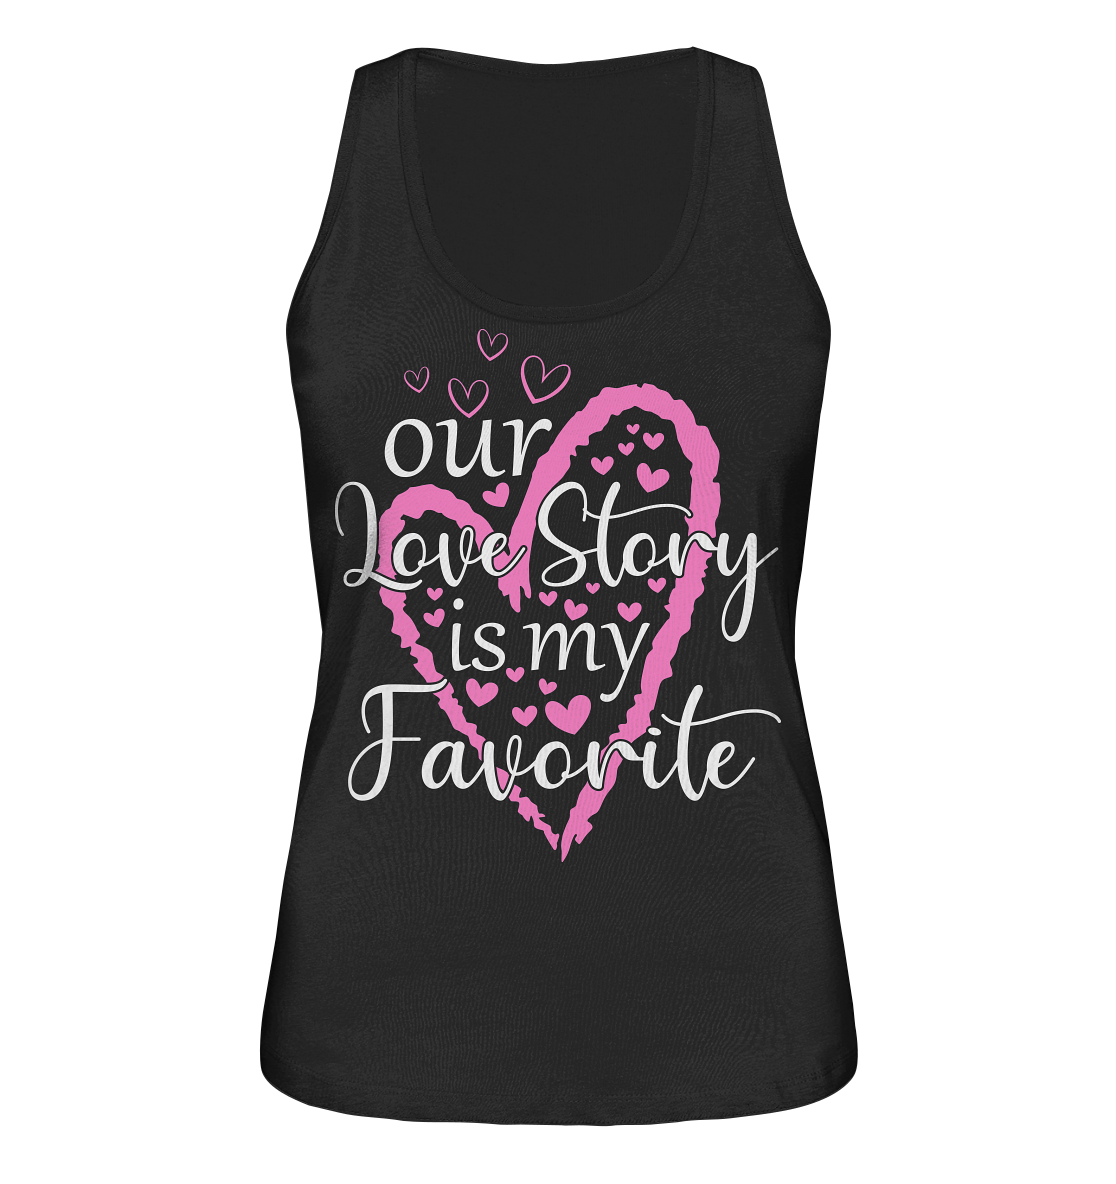 Our love story is my favourite - Ladies Organic Tank-Top